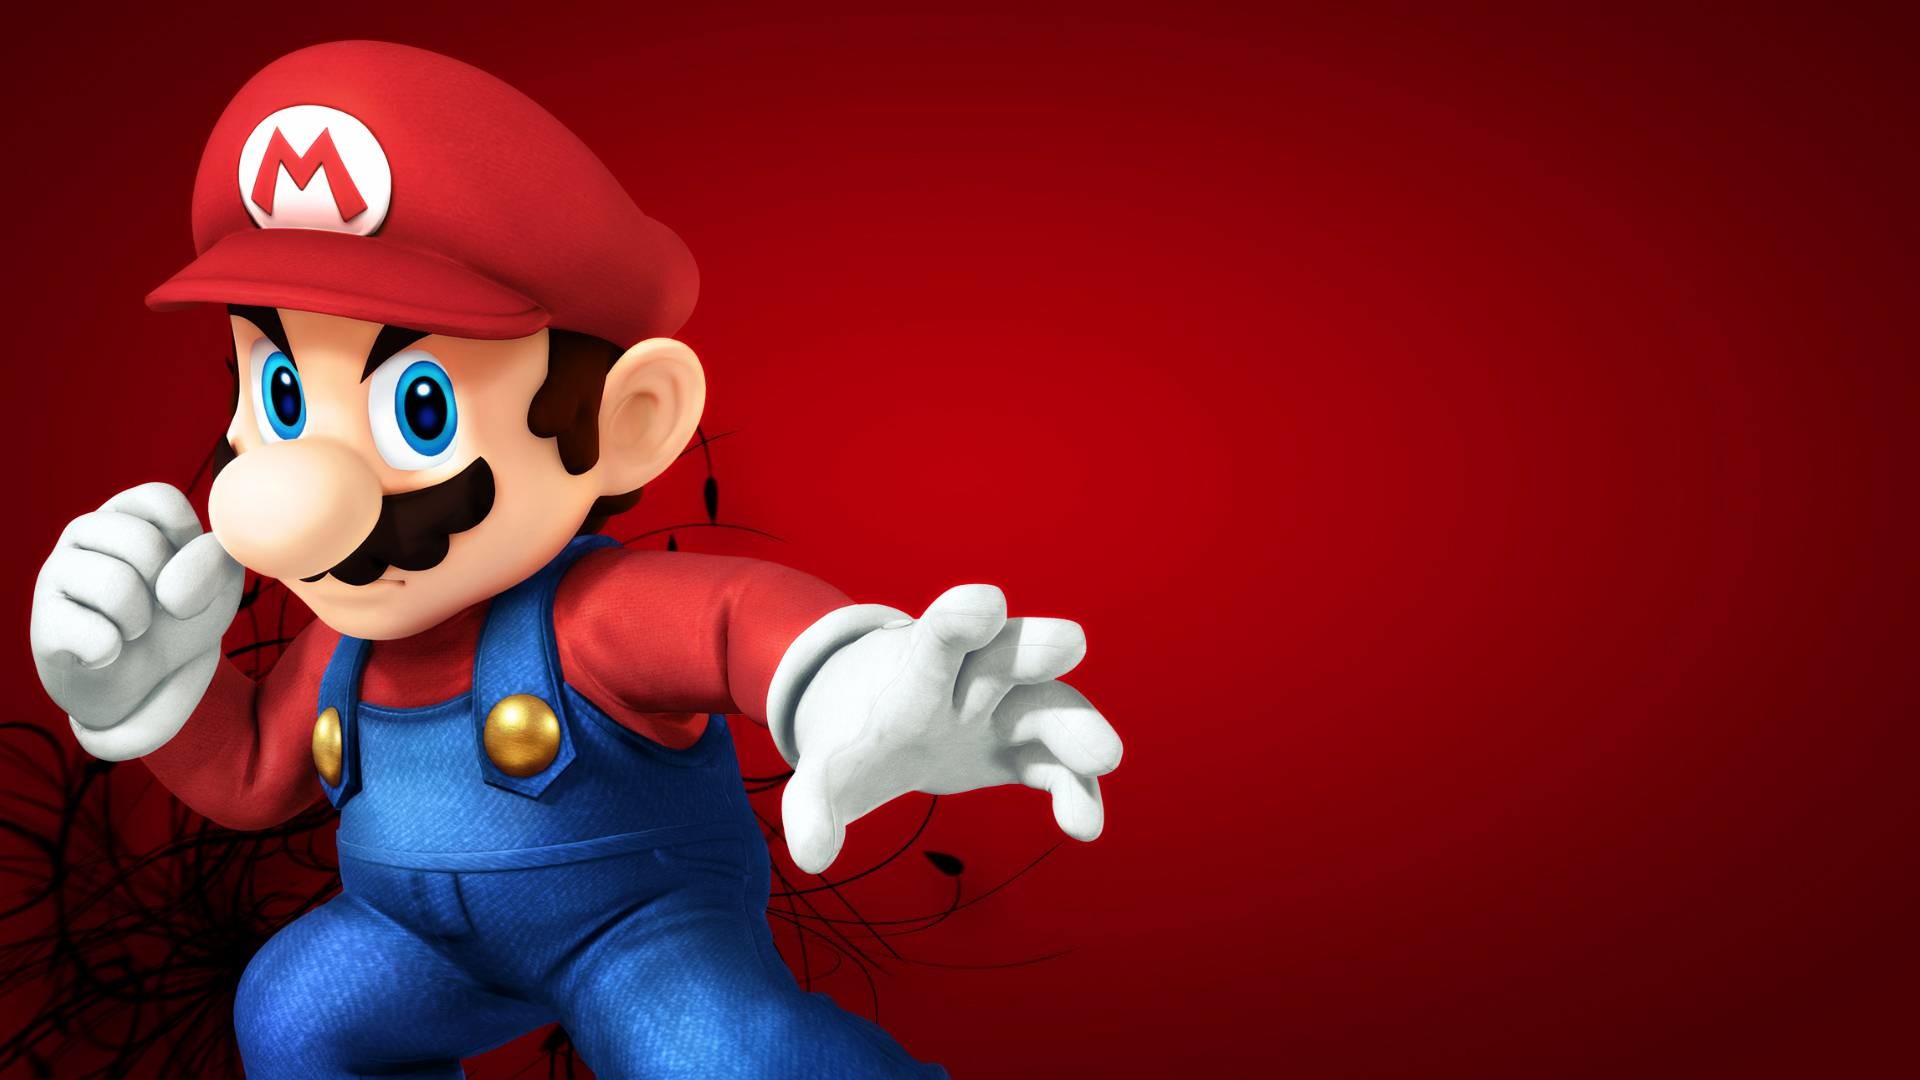 1920x1080 PC, Laptop Mario Bros Wallpapers, Wallpapers and Pictures for PC & Mac,  Laptop